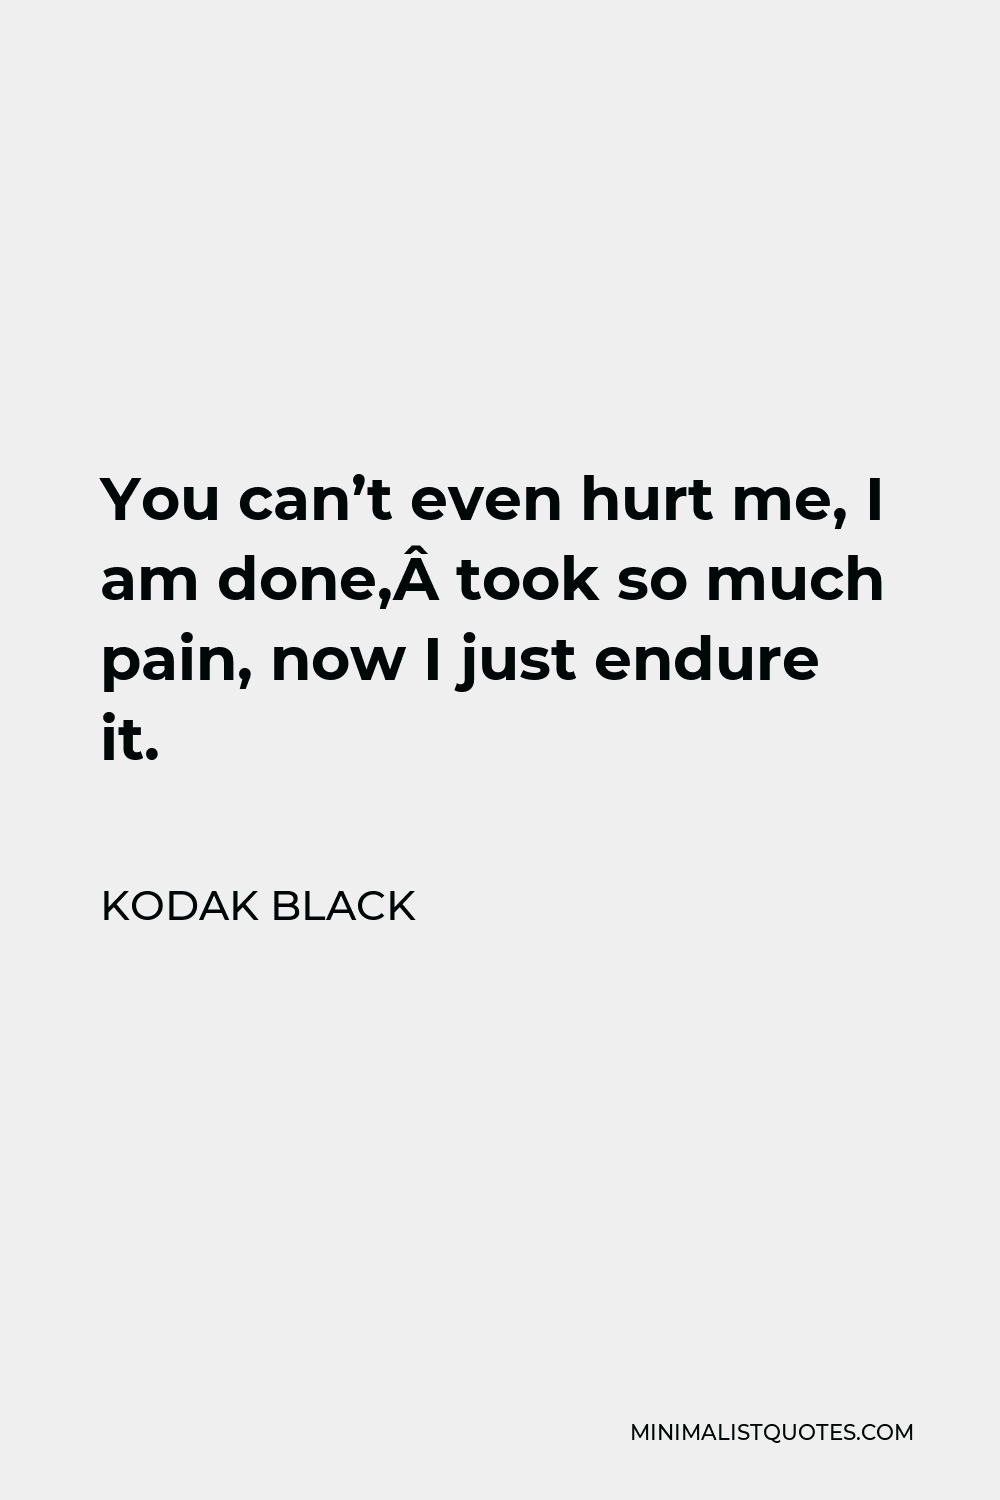 Kodak Black Quote - You can’t even hurt me, I am done, took so much pain, now I just endure it.